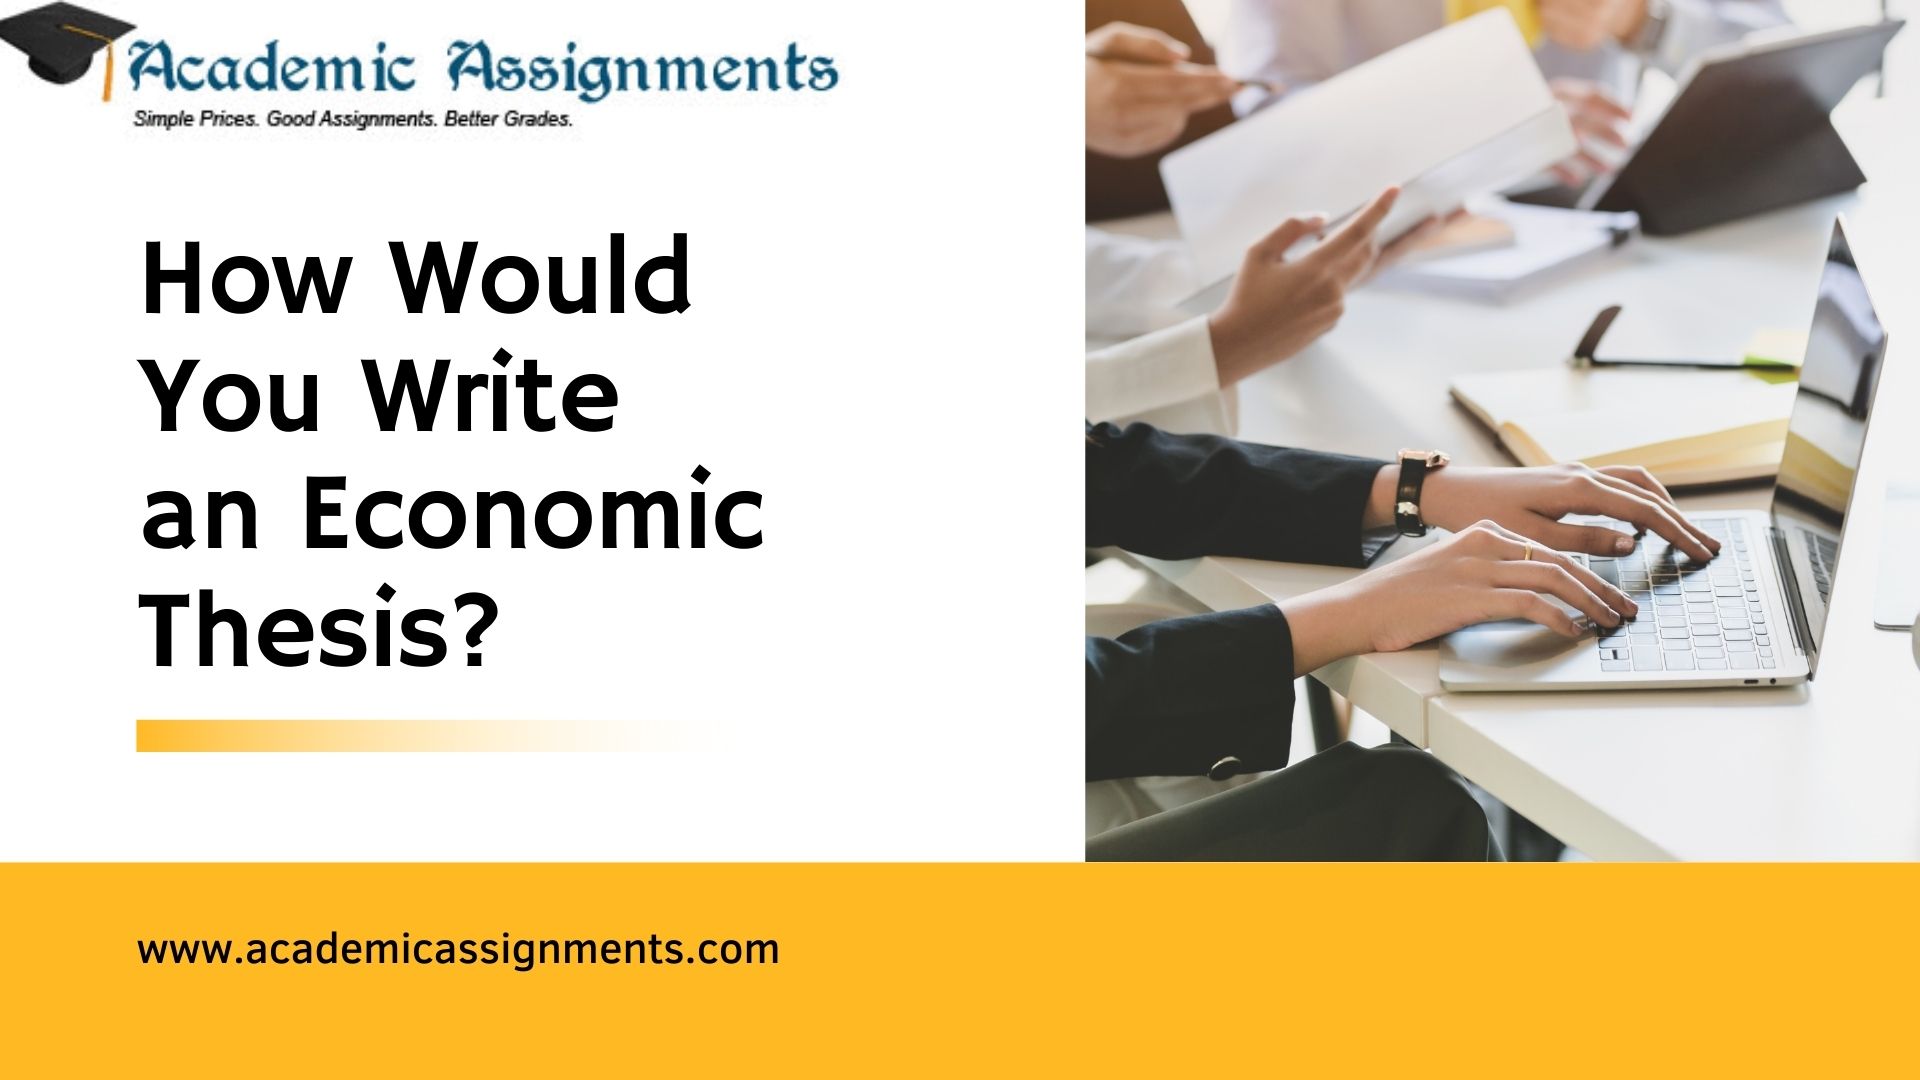 How Would You Write an Economic Thesis